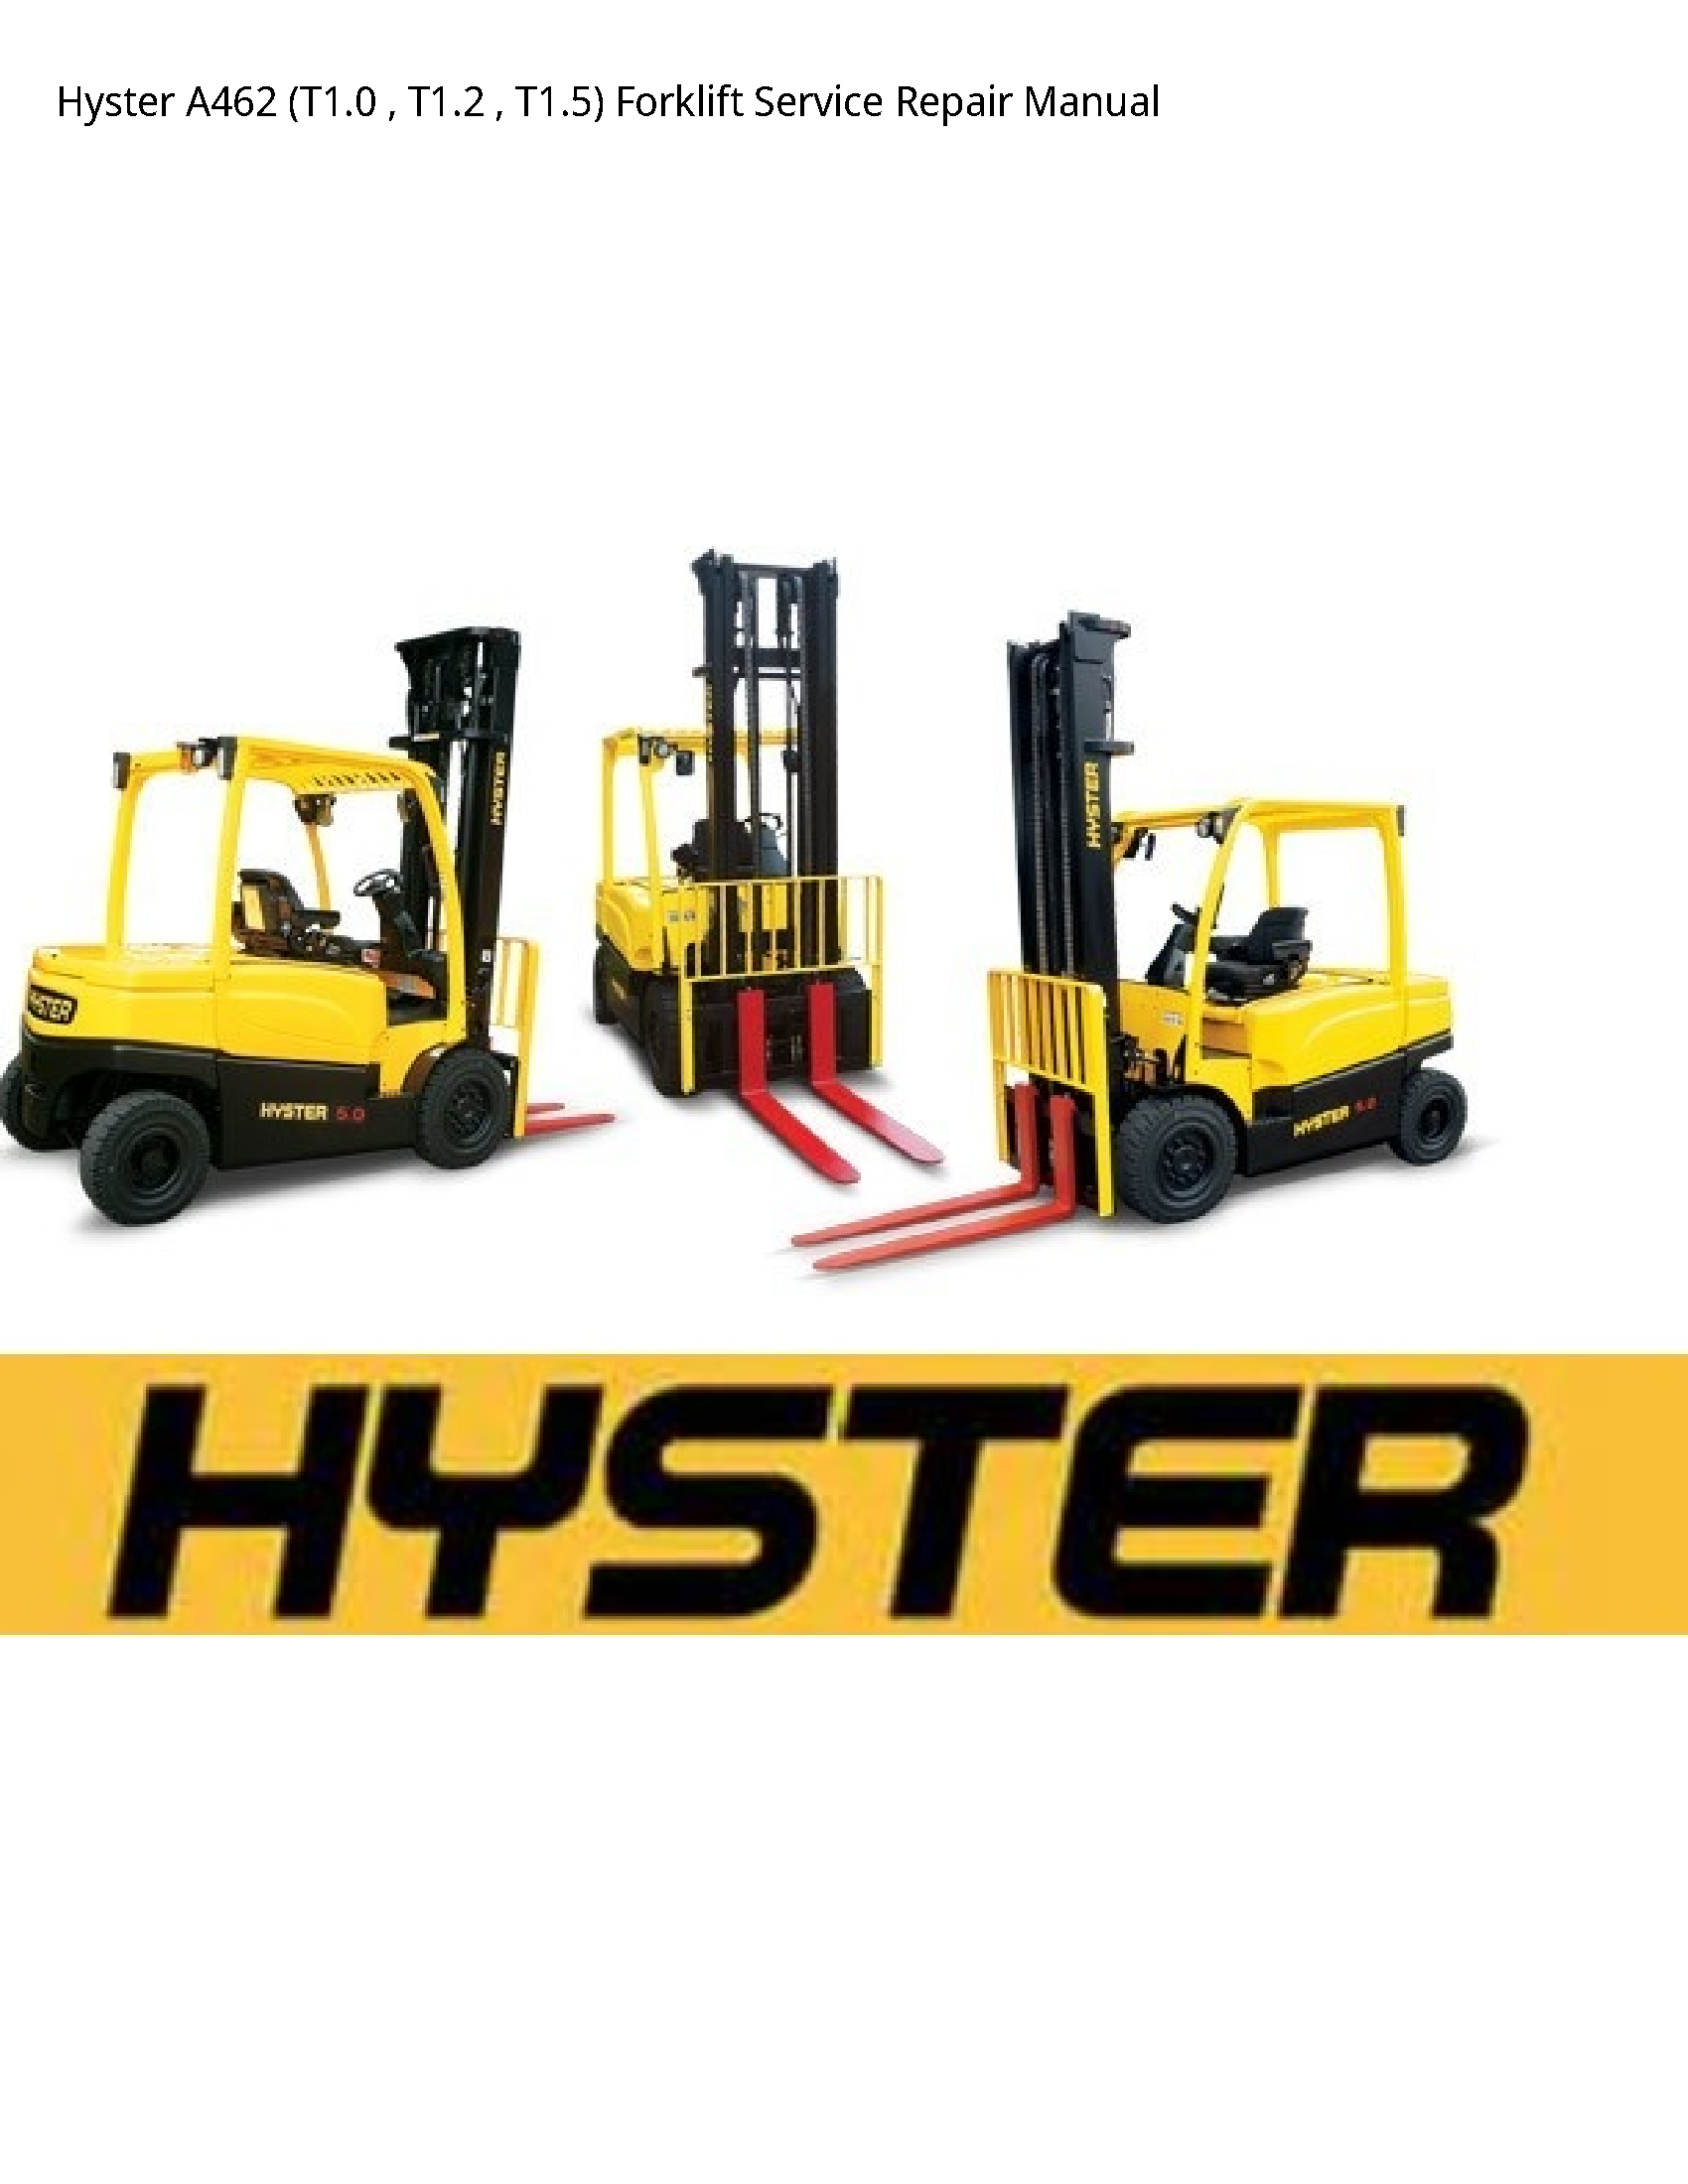 Hyster A462 Forklift manual